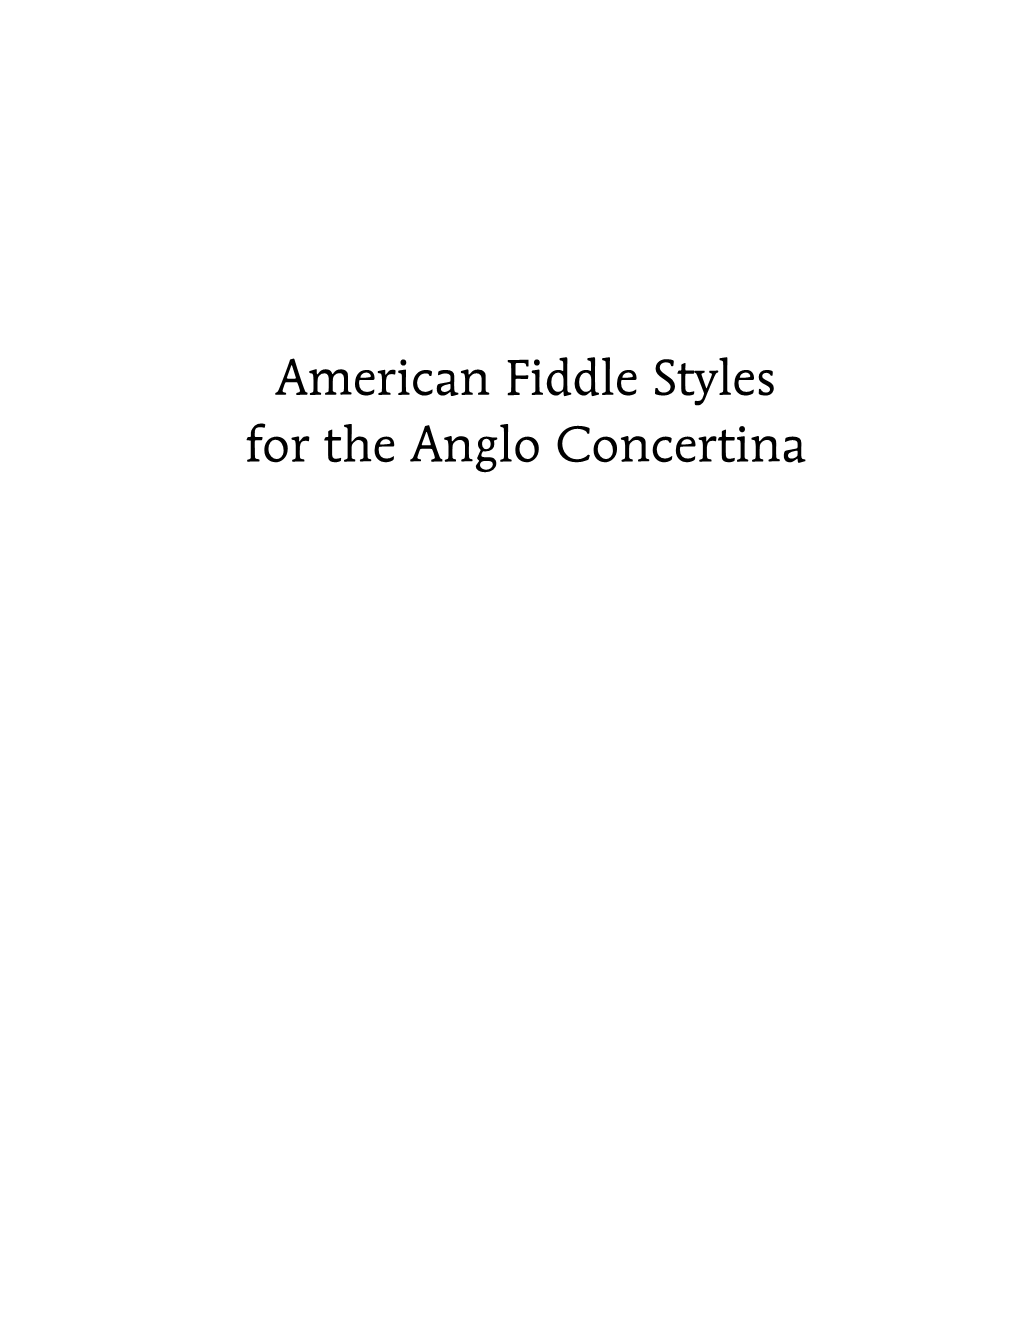 American Fiddle Styles for the Anglo Concertina